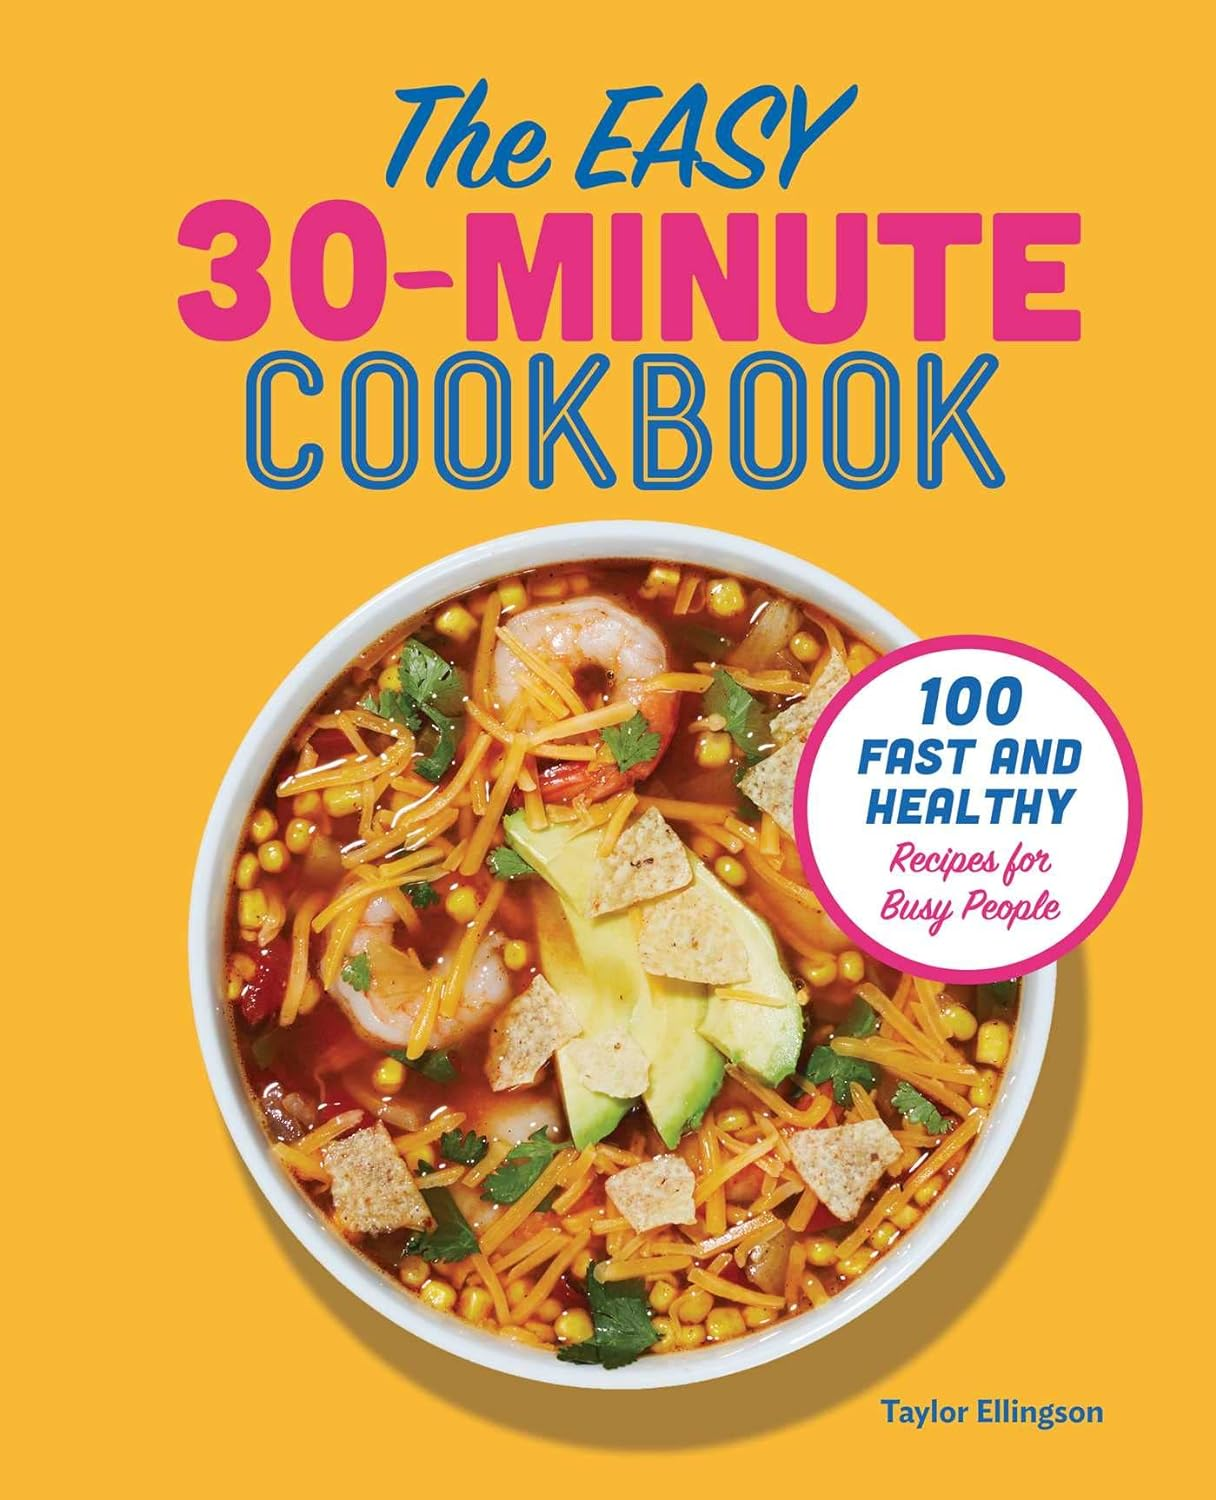 A Cookbook for Young Professionals, like this "Easy 30-Minute Cookbook", is a great idea for graduating seniors getting ready to move out on their own, where they'll need to cook more often.